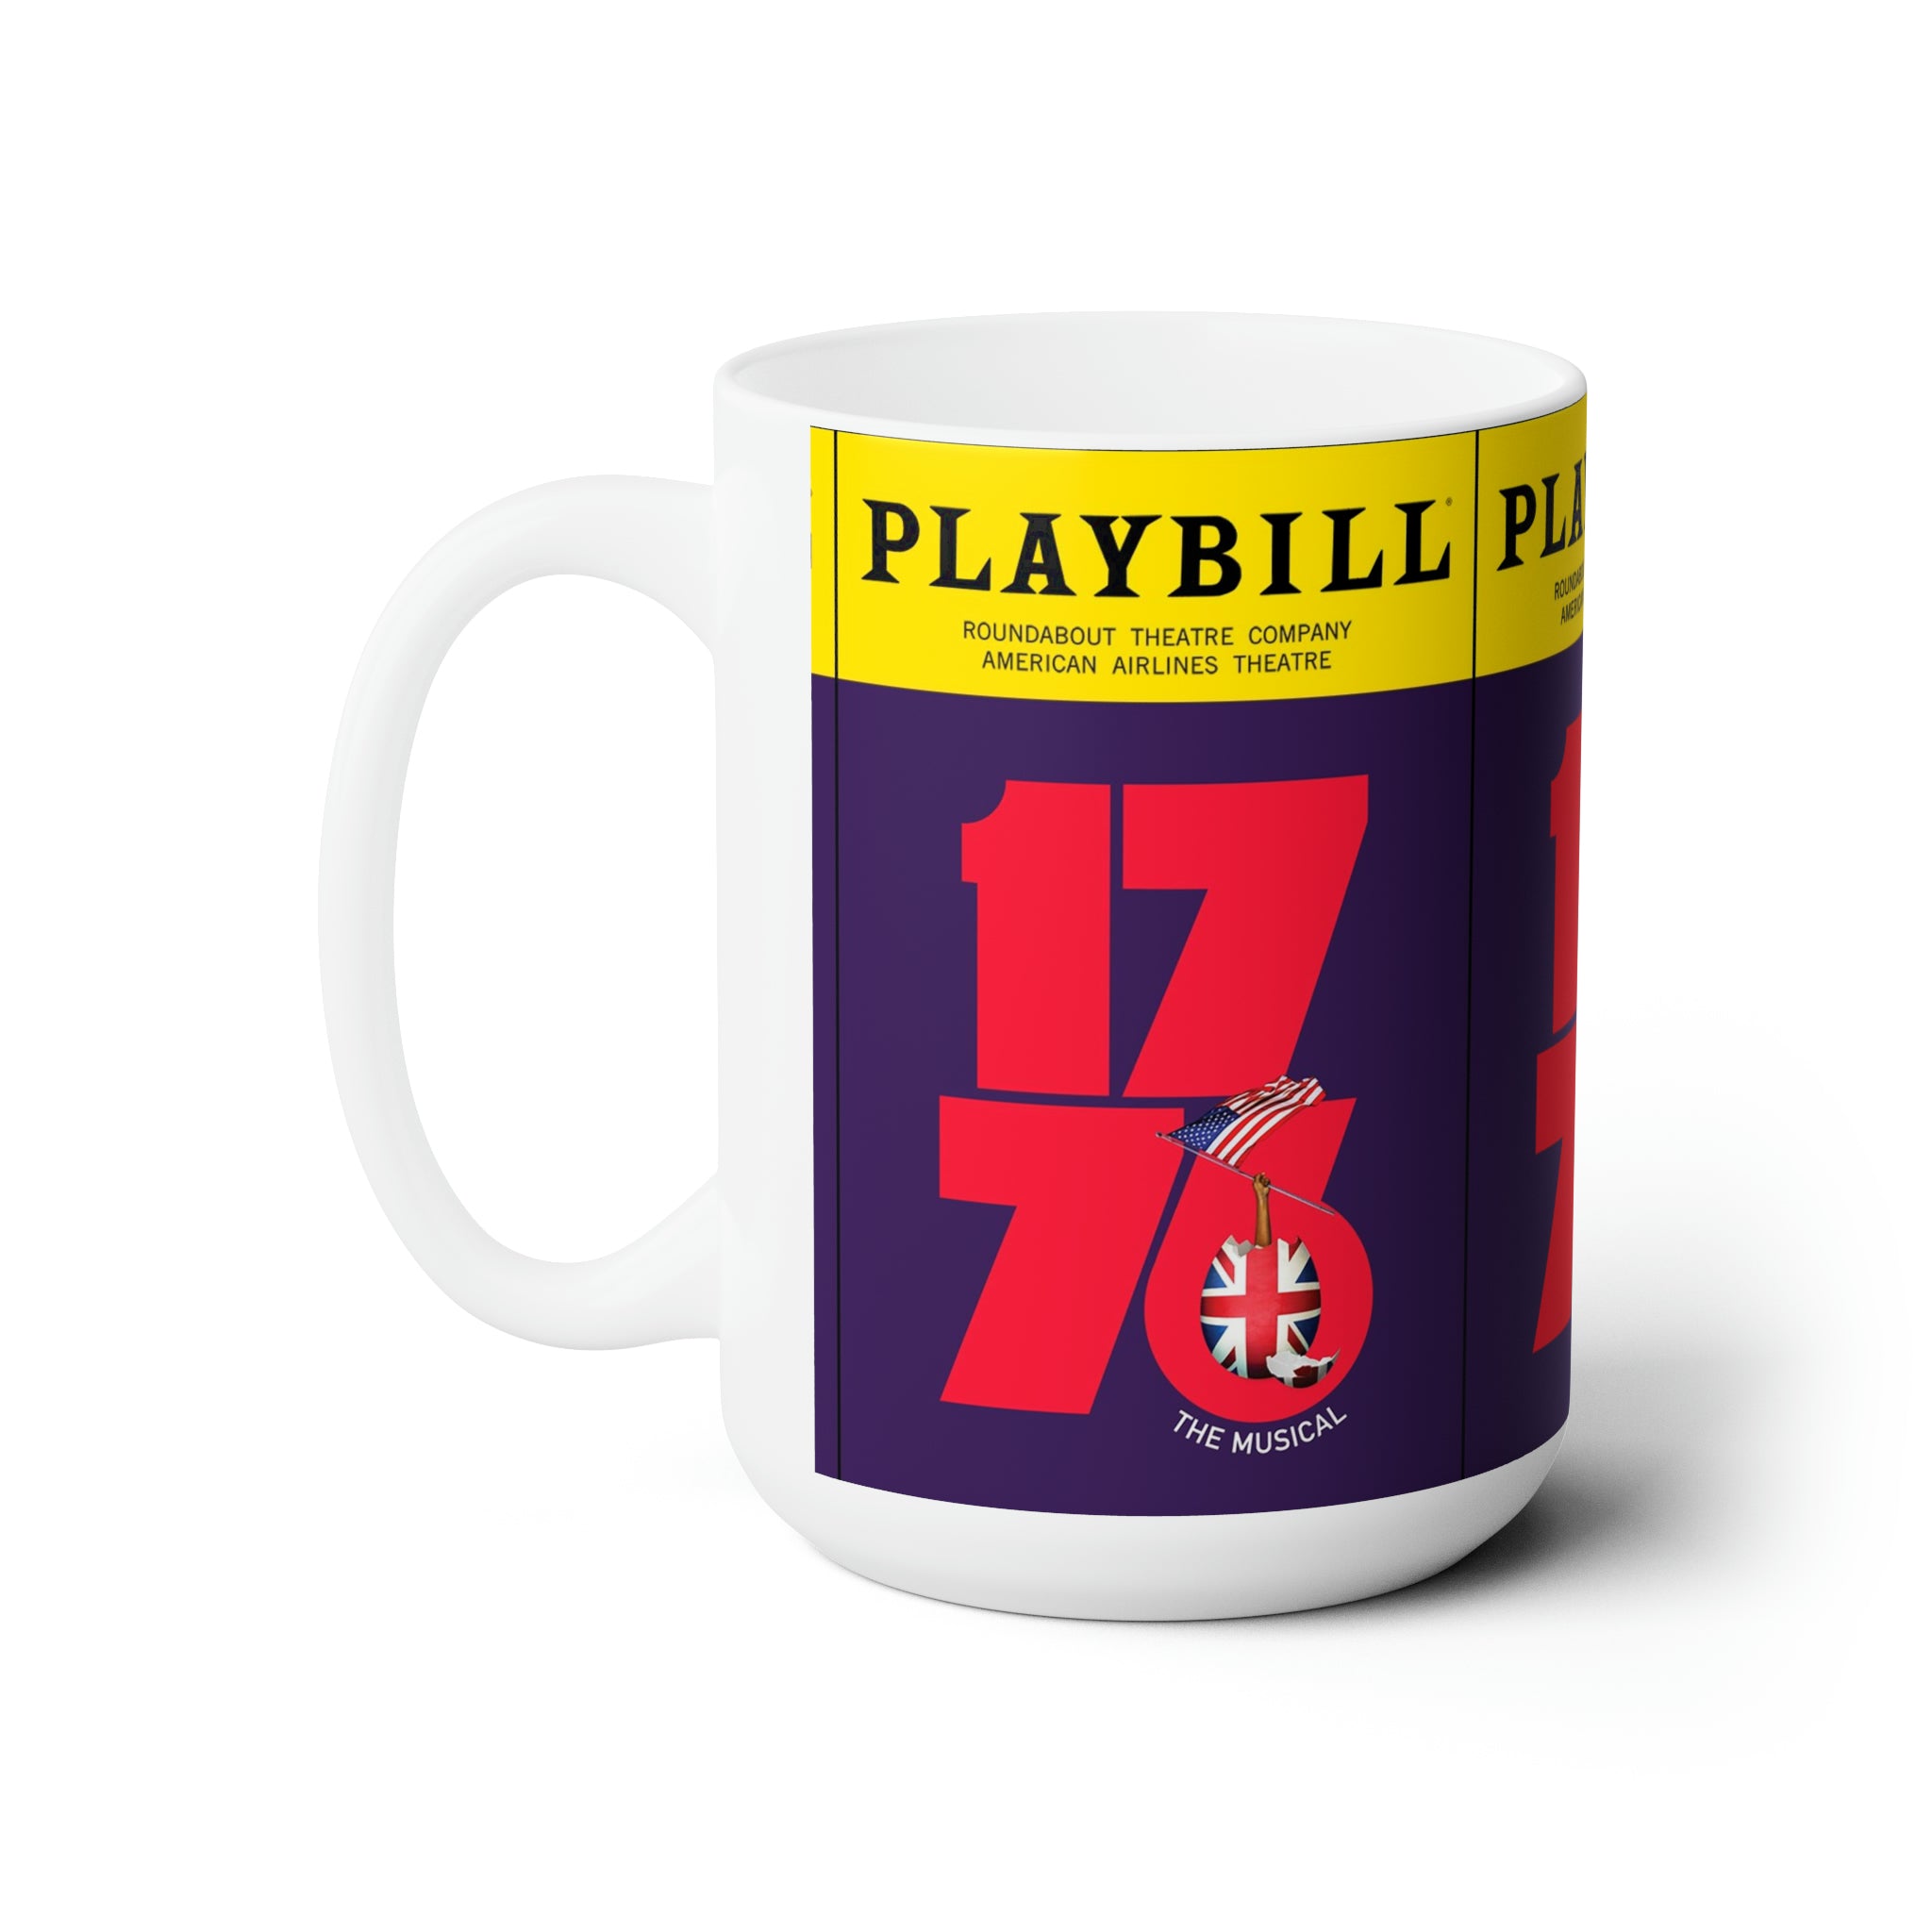 https://creationsbychrisandcarlos.store/products/1776-the-broadway-play-white-ceramic-mug